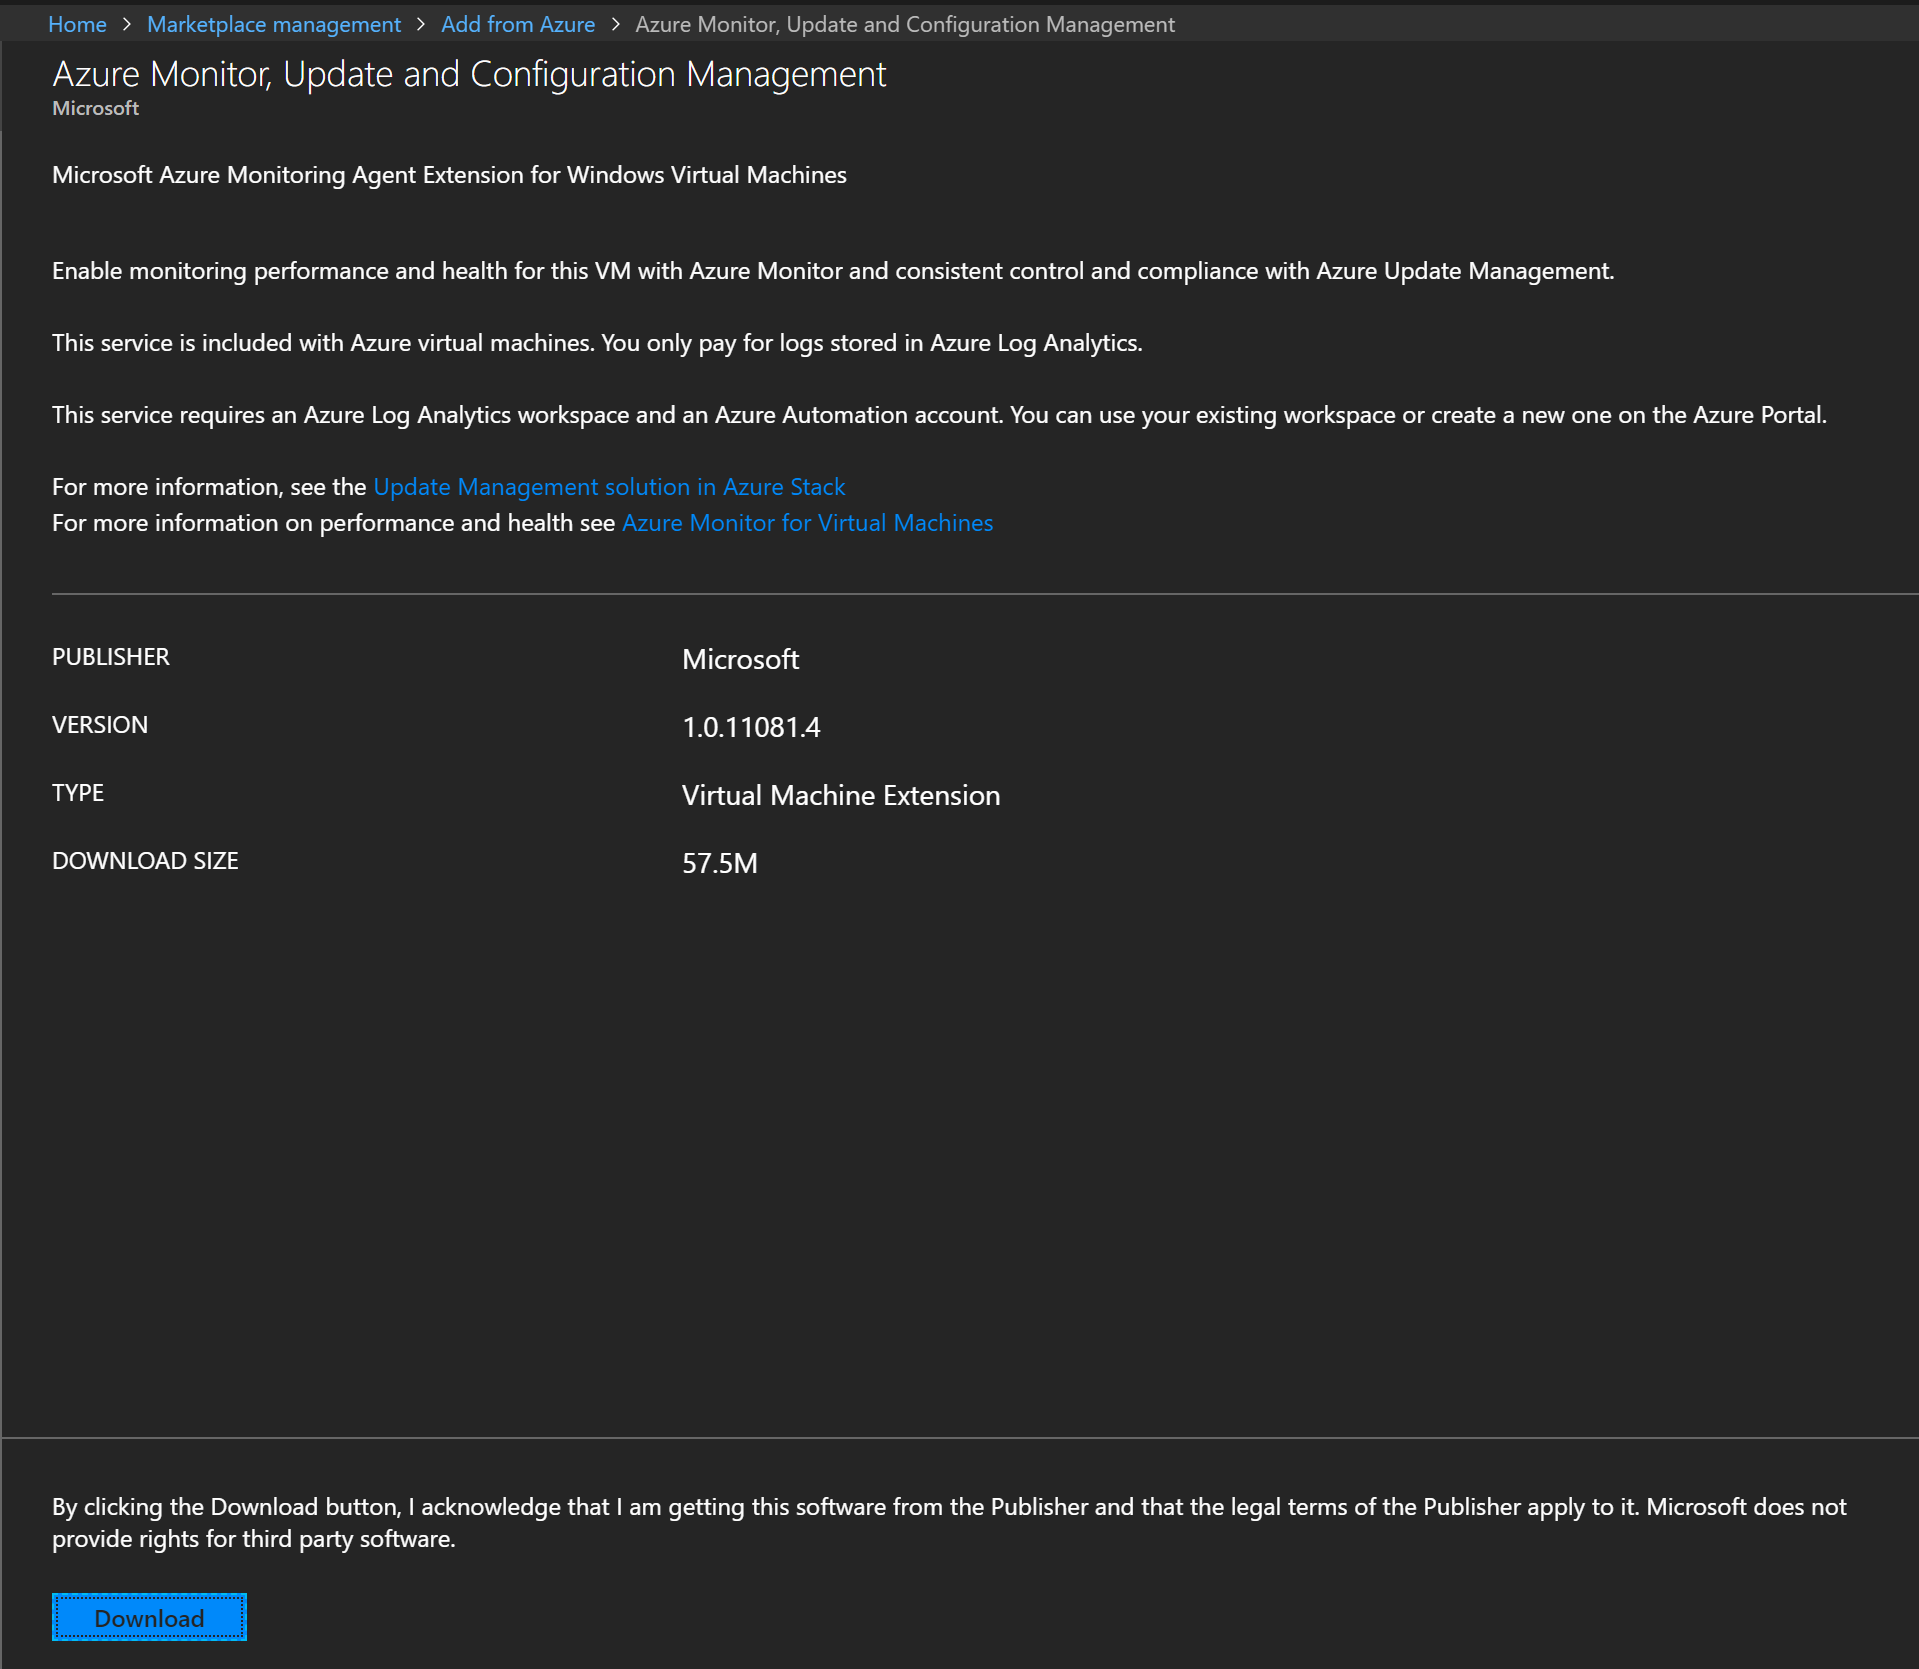 The "Home > Marketplace management > Add from Azure > Azure Monitor, Update and Configuration Management" dialog box describes the extension and provides a Download button.